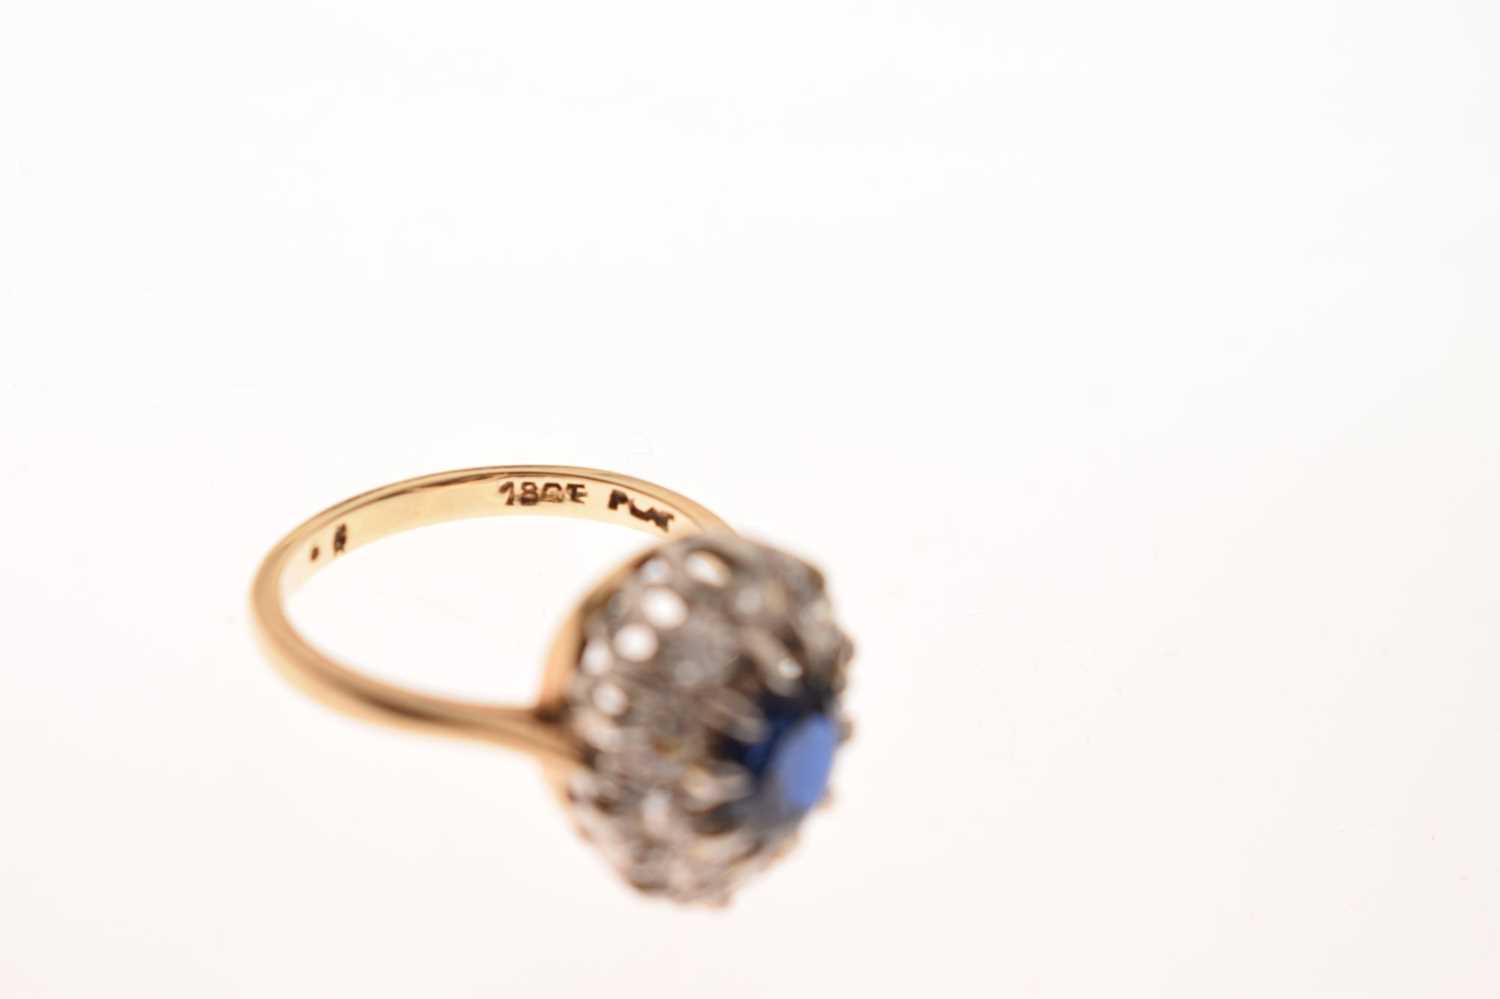 Sapphire and diamond cluster ring - Image 6 of 6